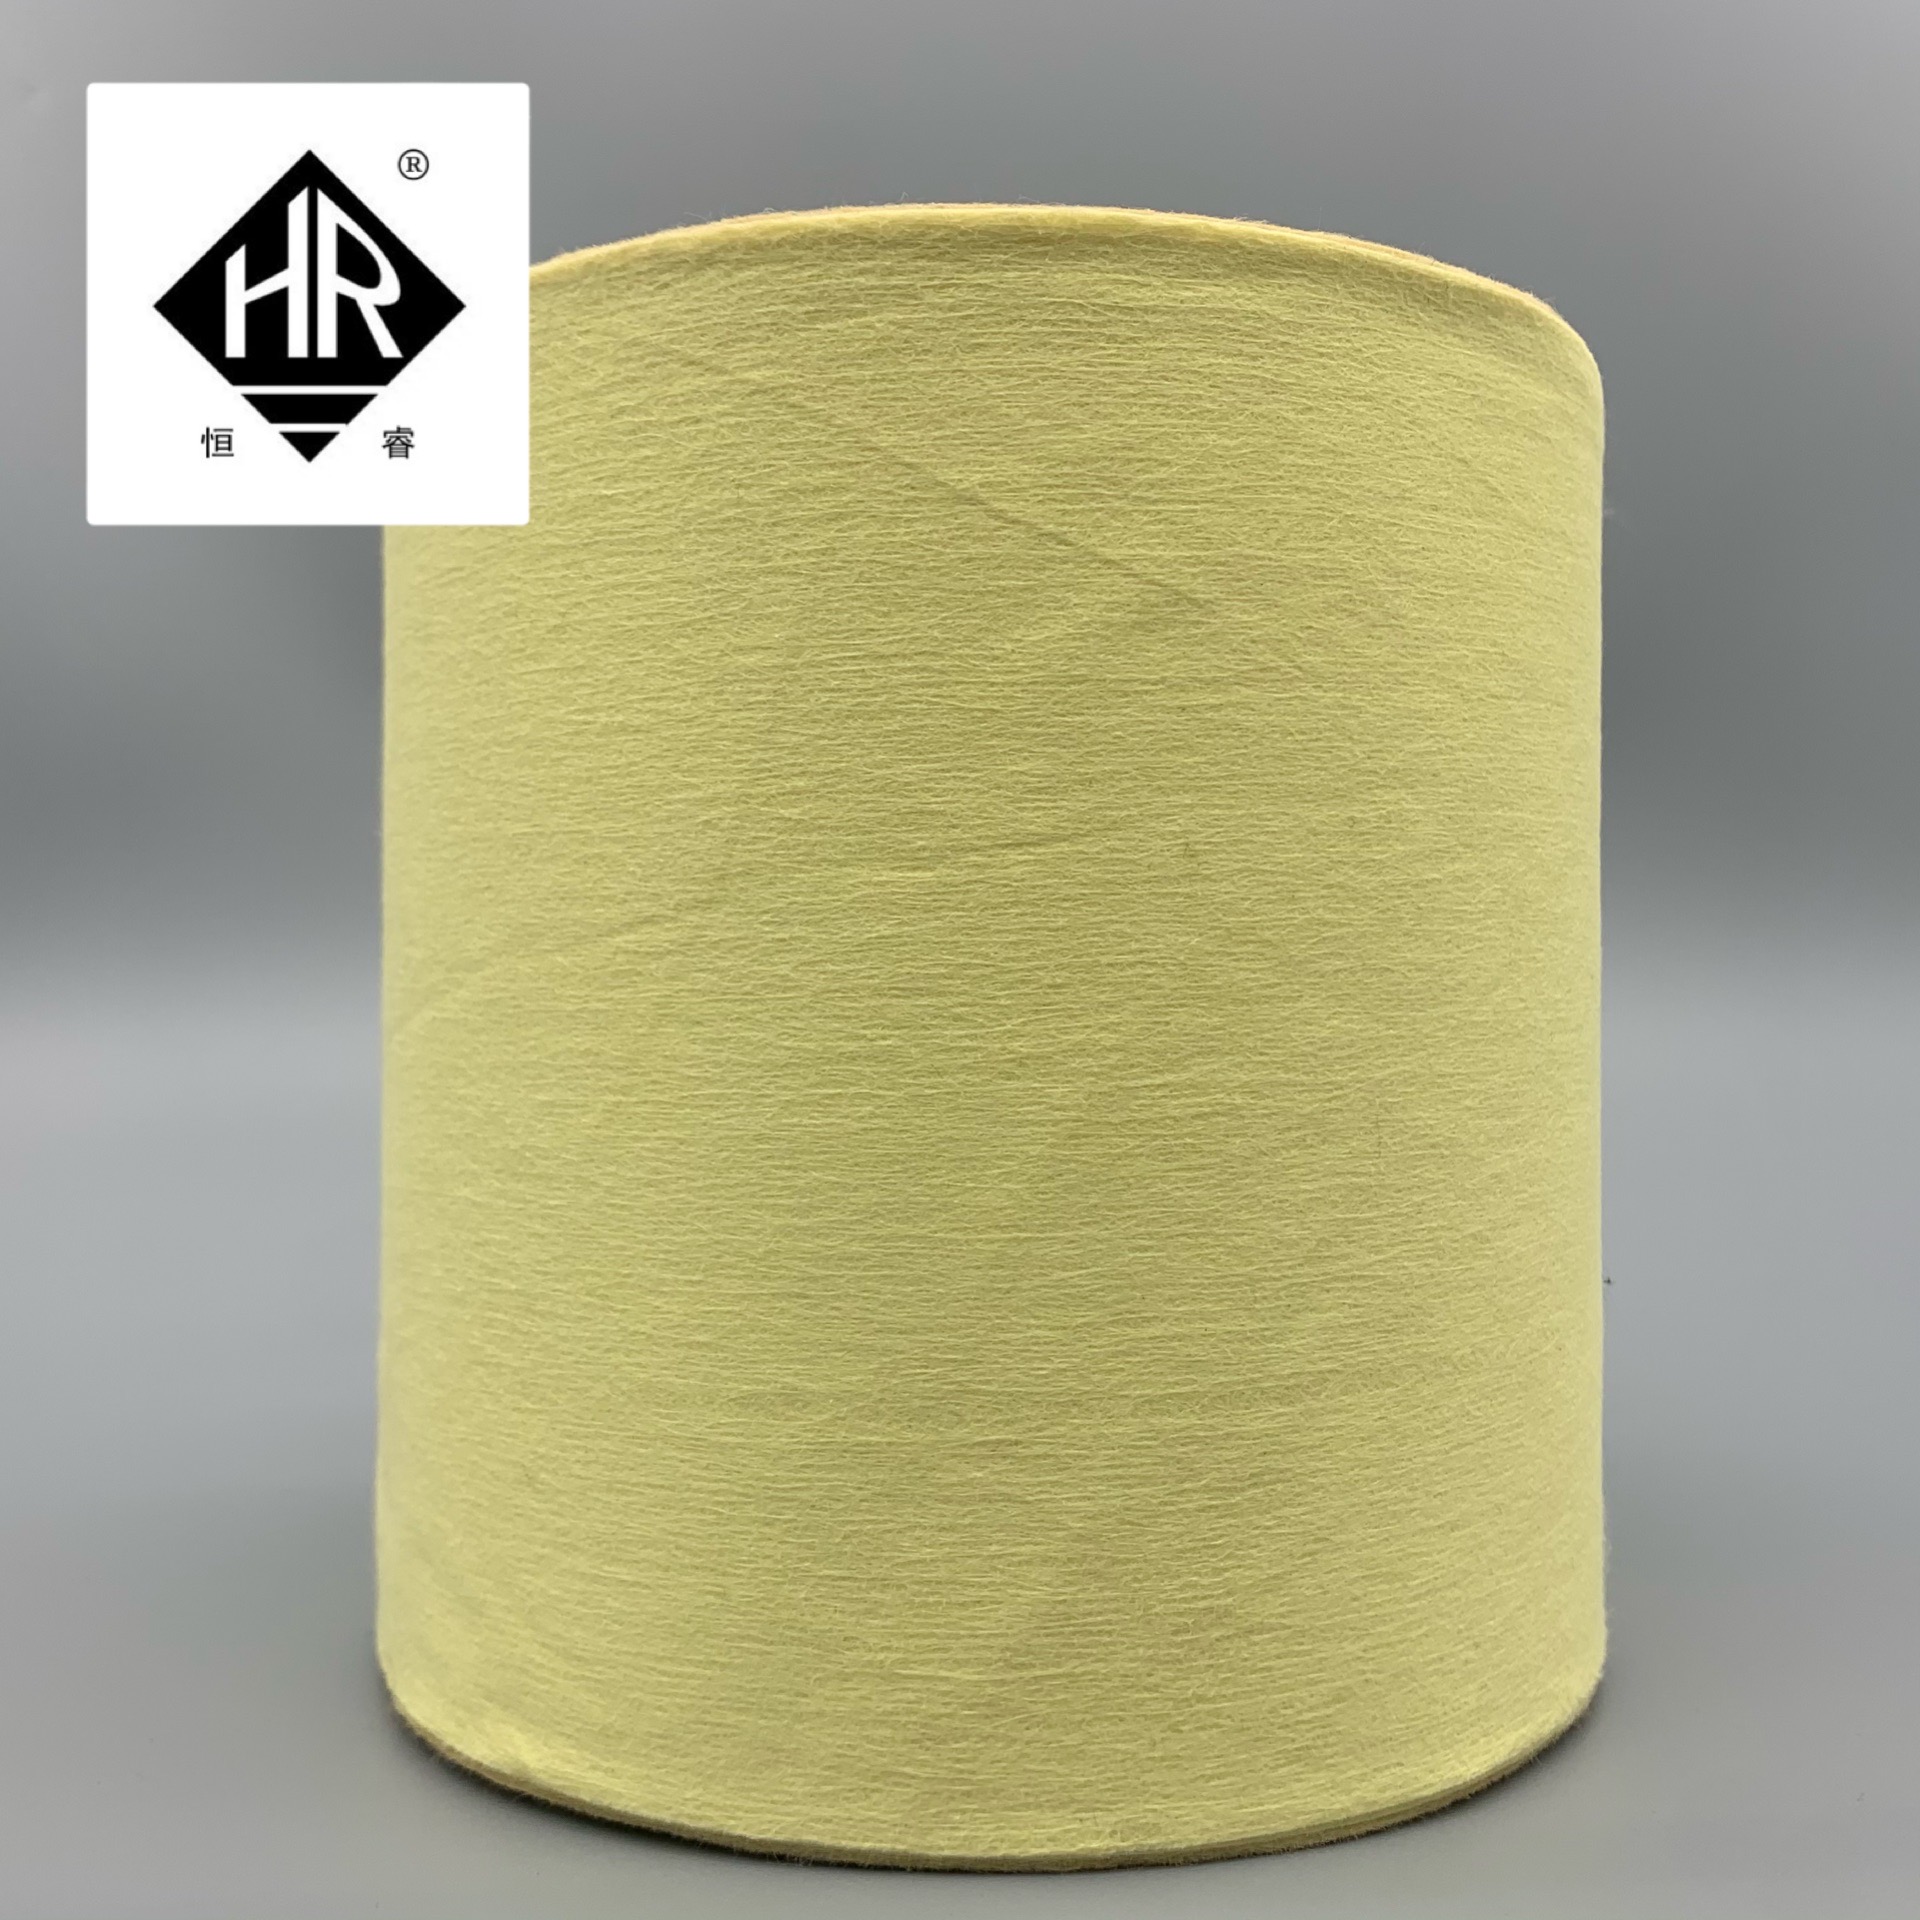 High Strength Felt For Rubber Rolls For Papermaking Featured Image